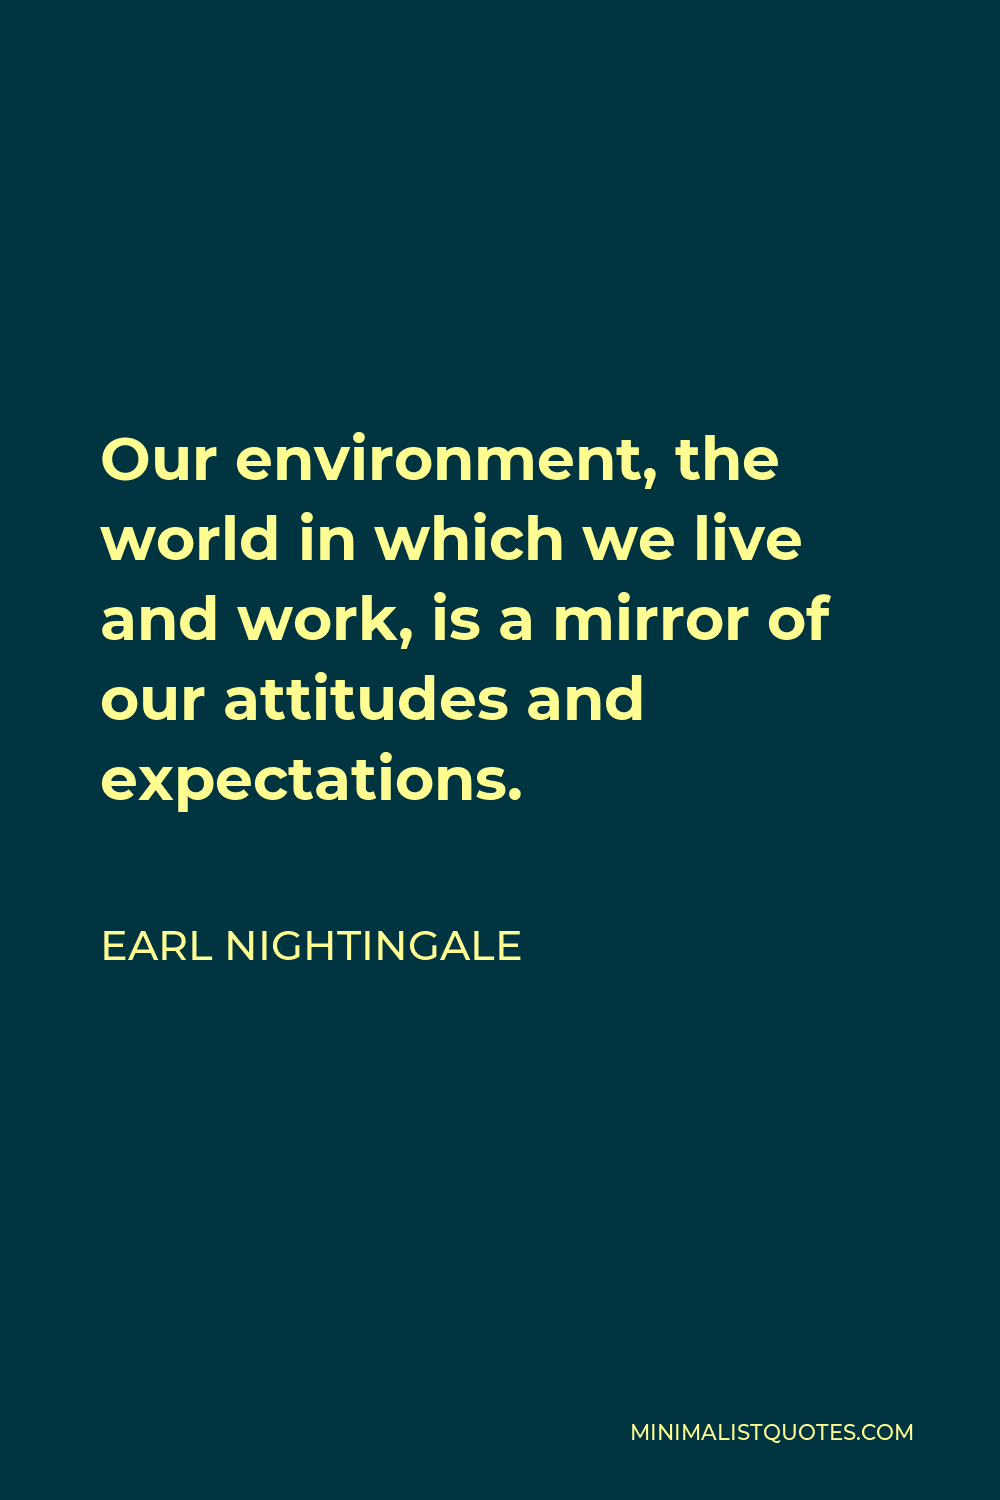 Earl Nightingale Quote - Our environment, the world in which we live and work, is a mirror of our attitudes and expectations.